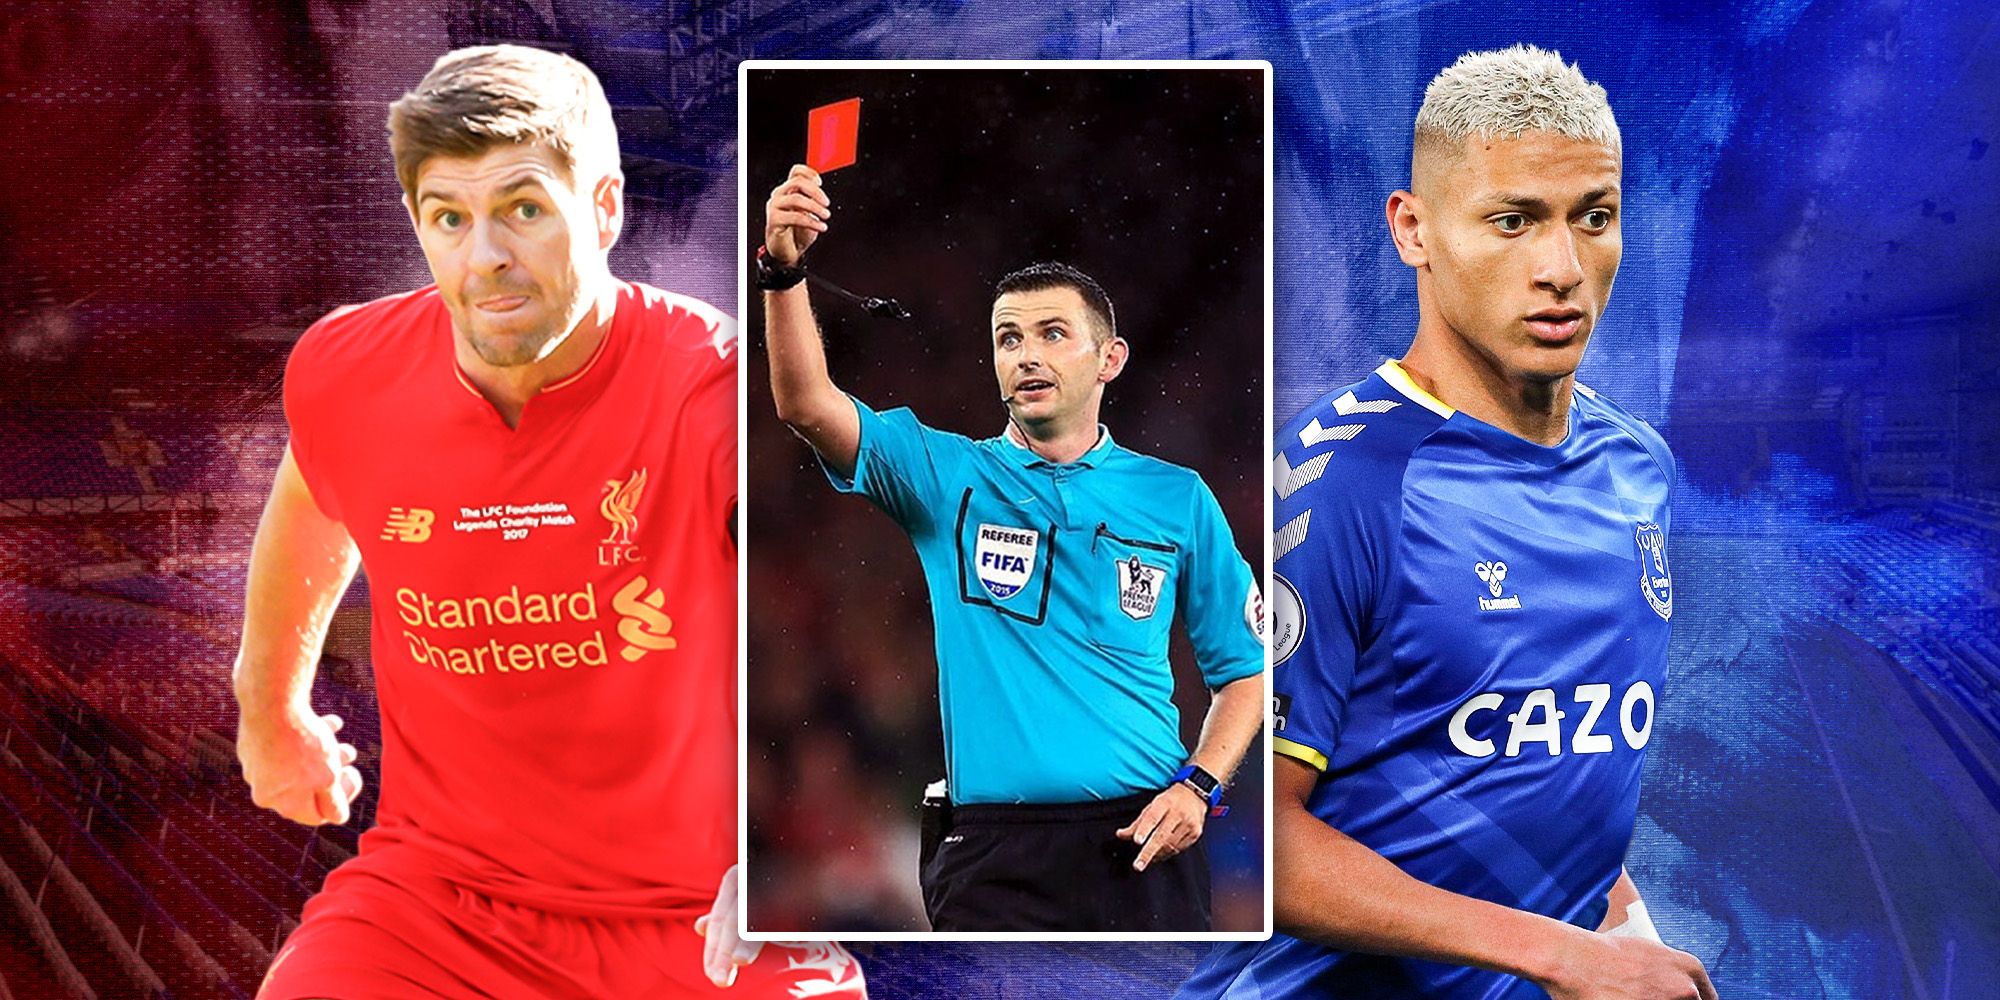 Liverpool's Steven Gerrard, referee Michael Oliver showing a red card and Everton's Richarlison.